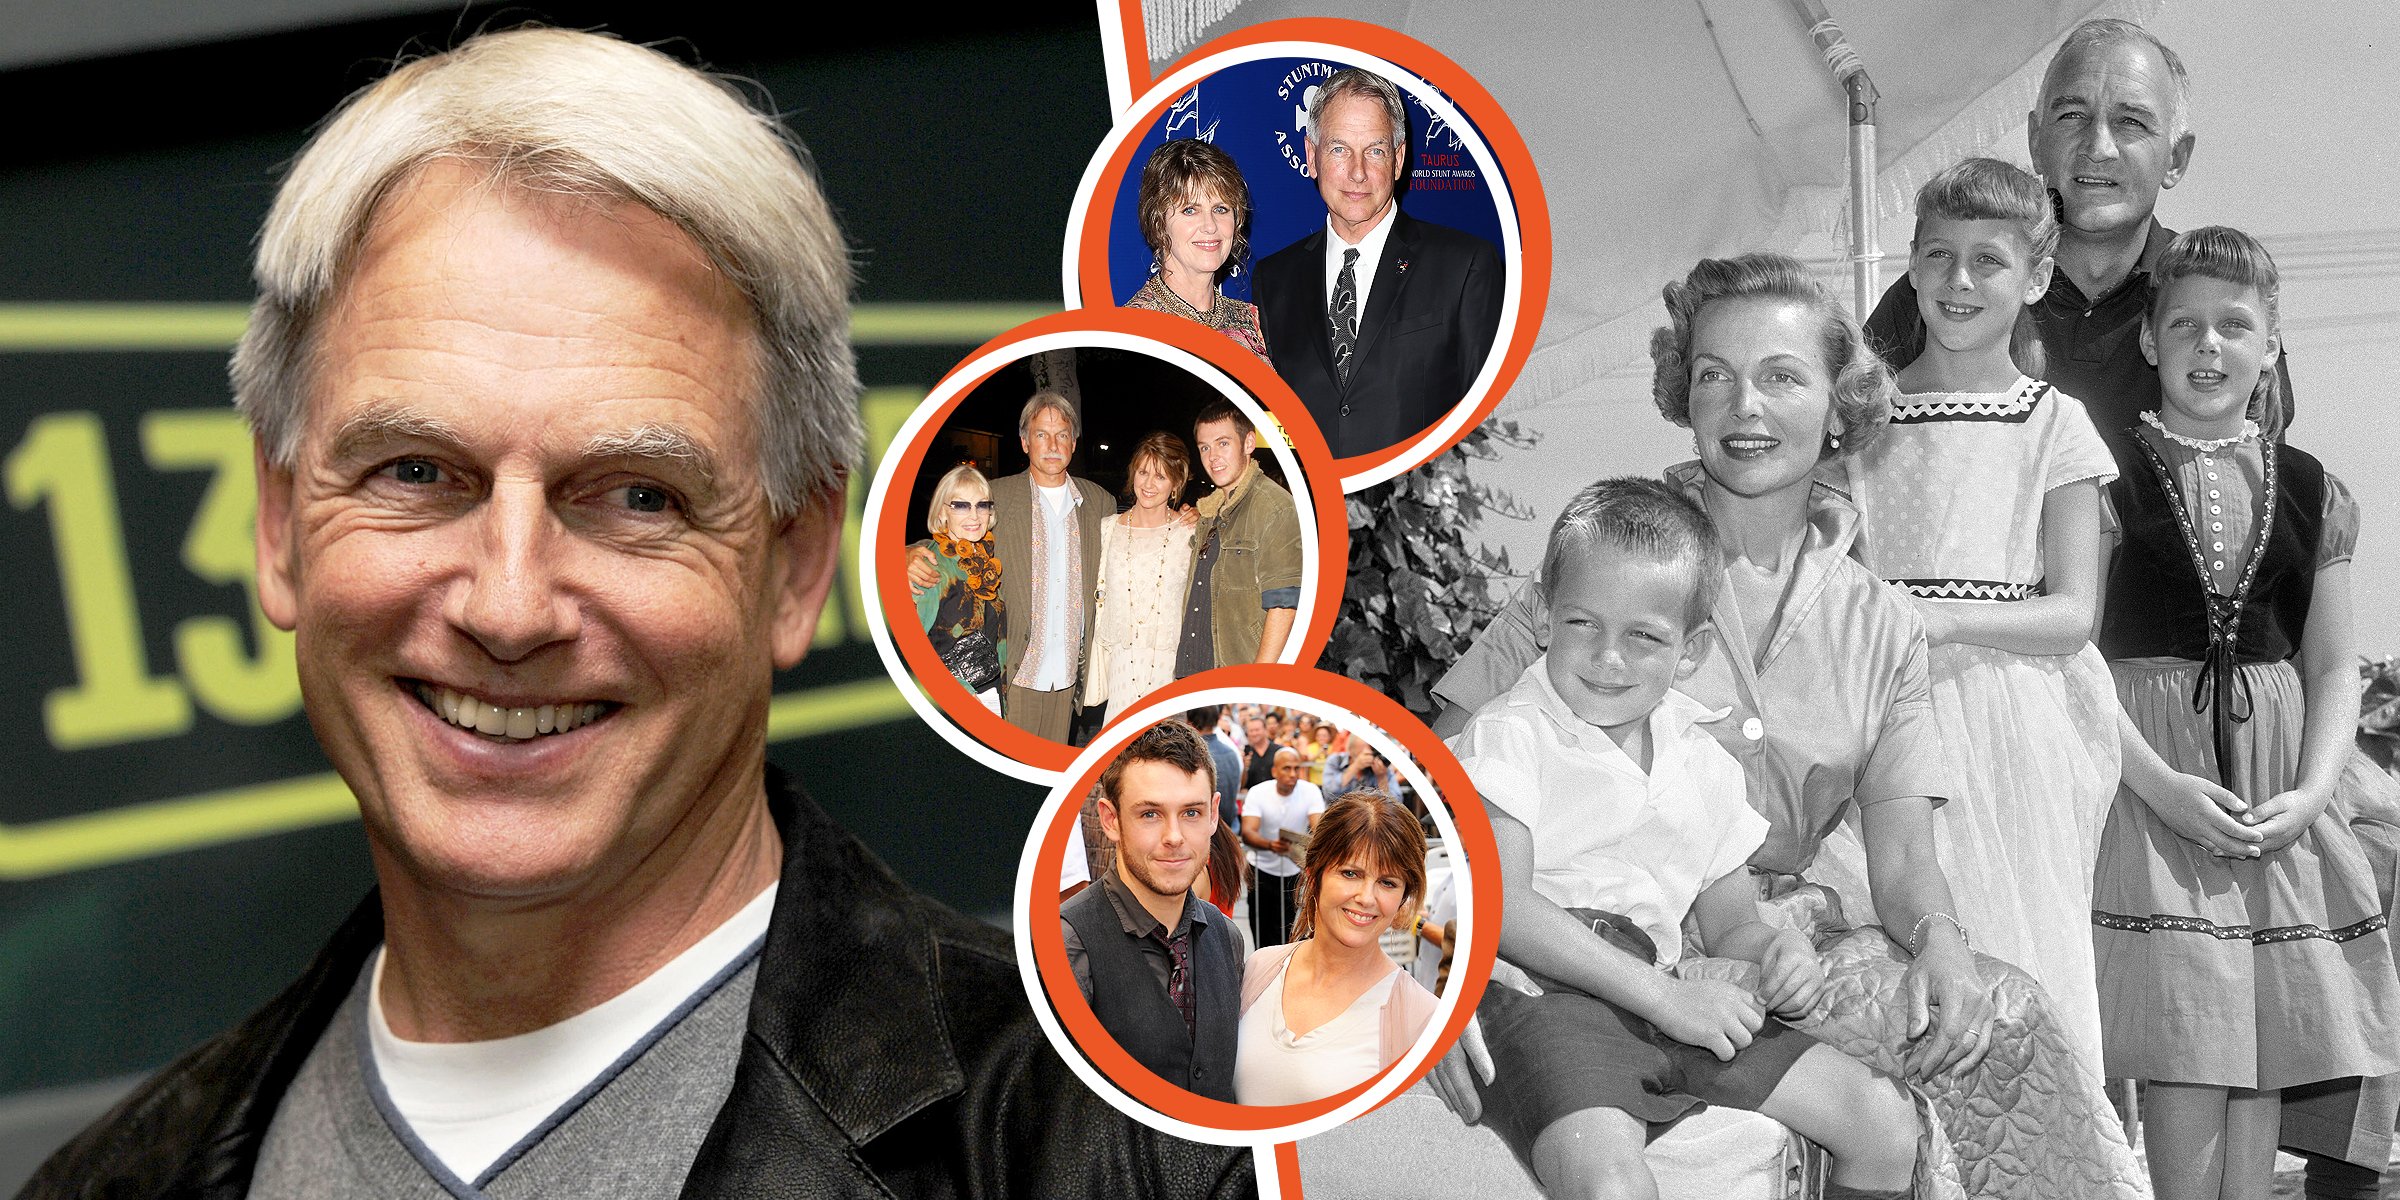 Mark Harmon | Pam Dawber and Mark Harmon | Elyse Knox, Mark Harmon, Pam Dawber and Sean | Pam Dawber and son |  Mark Harmon, Elyse Knox, Kristin Harmon, Tom Harmon and Kelly Harmon | Source: Getty Images 